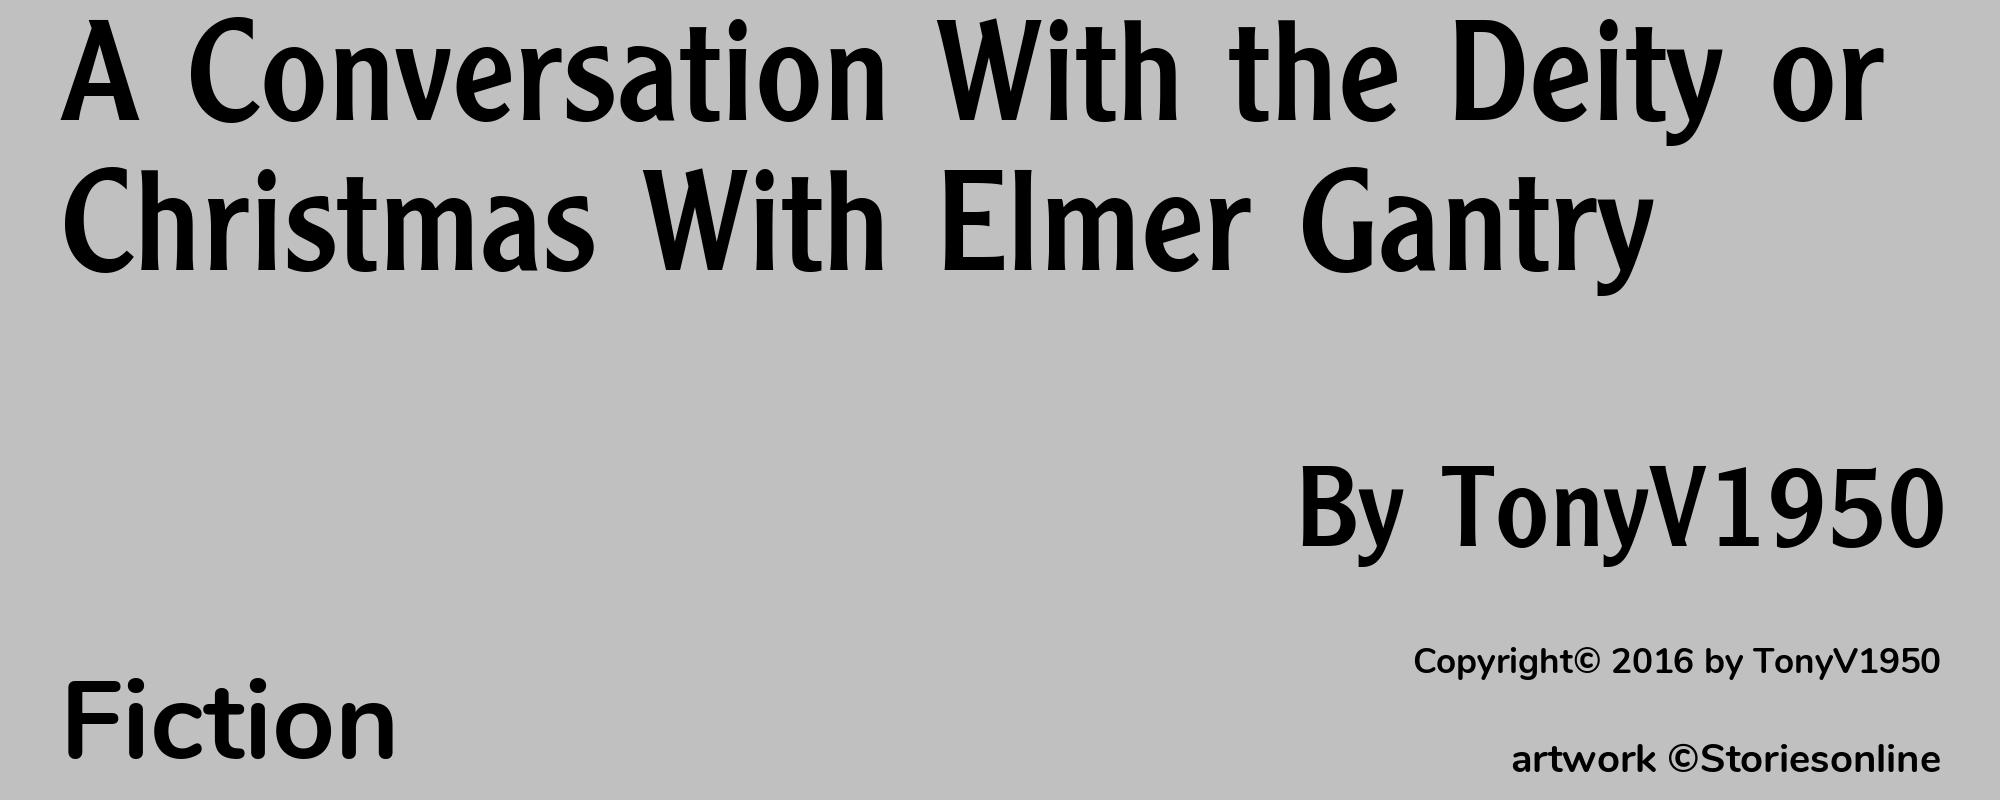 A Conversation With the Deity or Christmas With Elmer Gantry - Cover